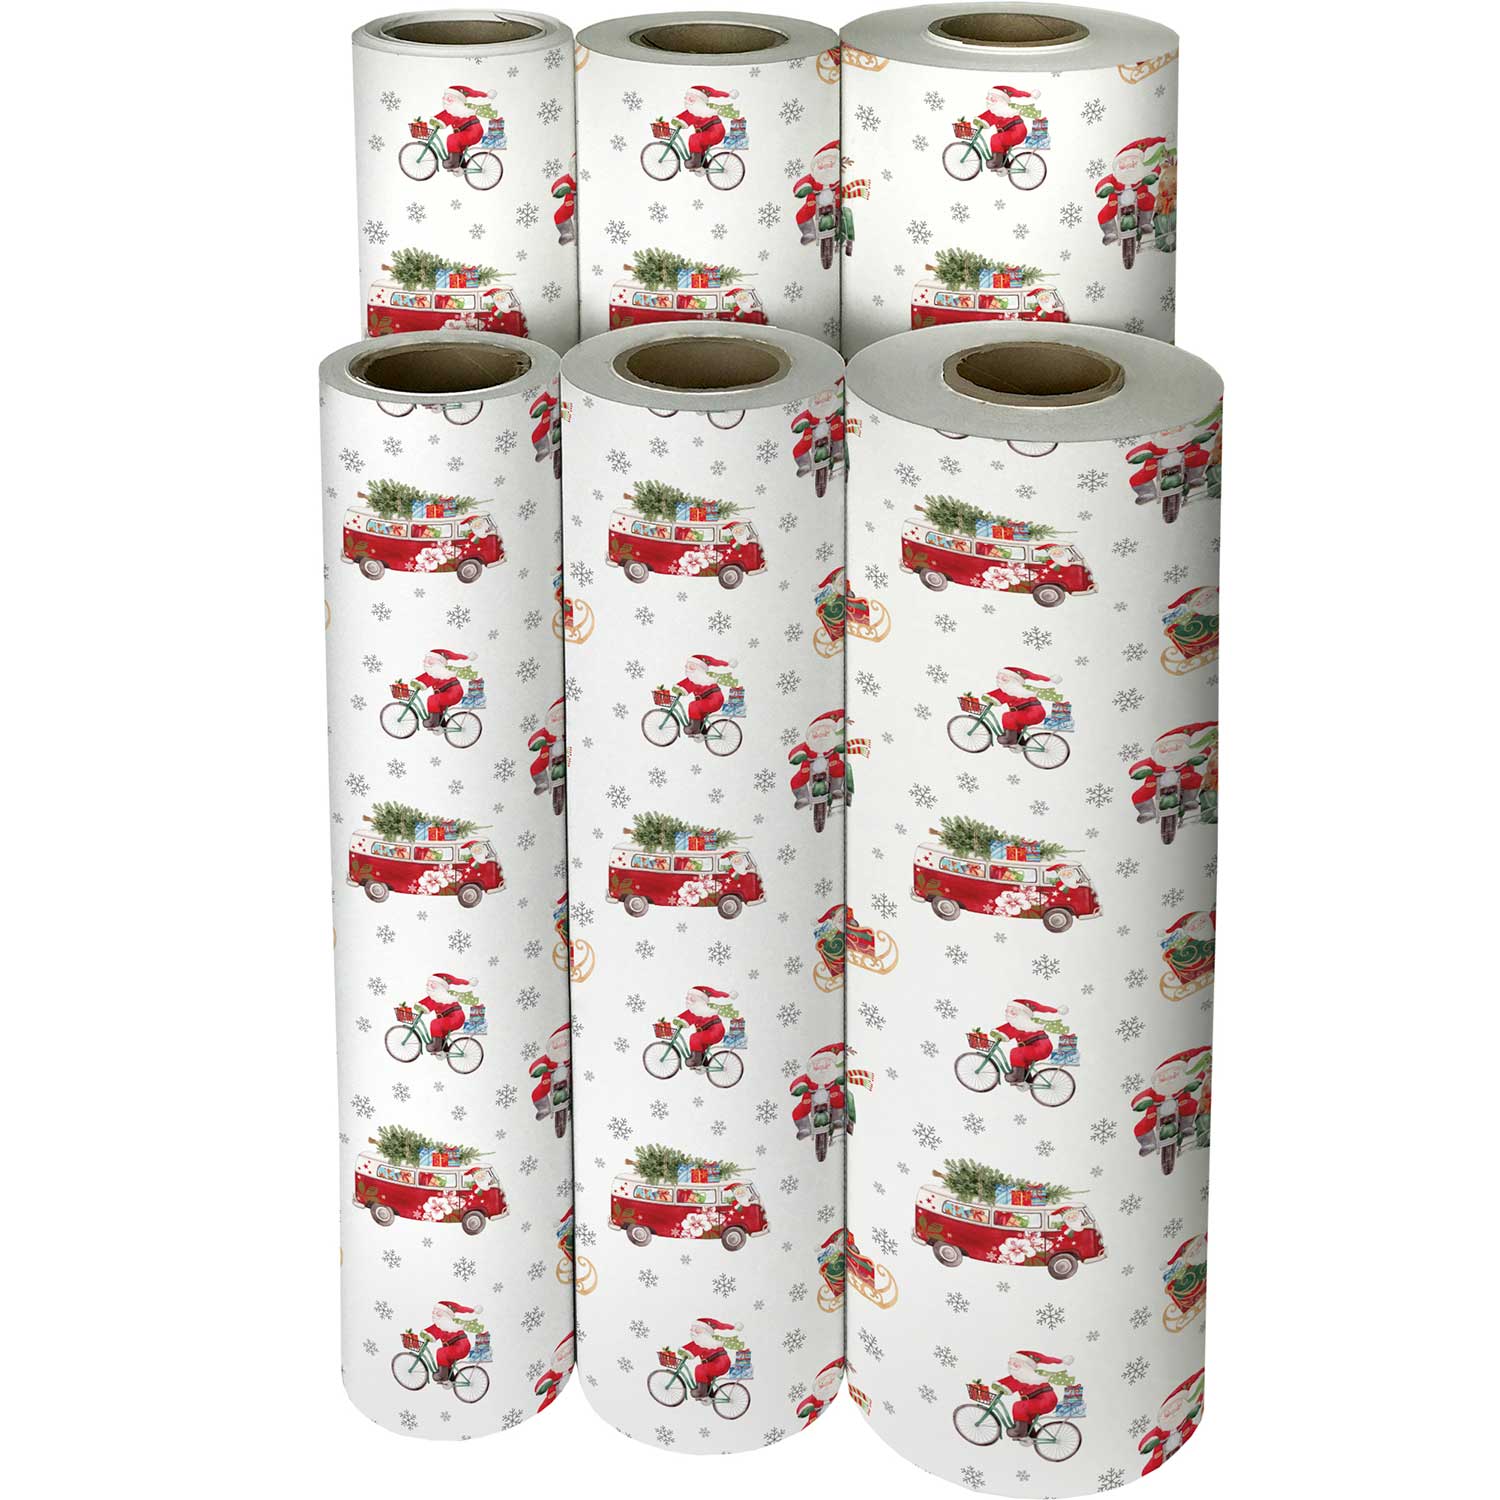 Santa Bicycle Christmas Gift Wrap Jumbo Rolls 10 ft x 30 in (6 Pieces)